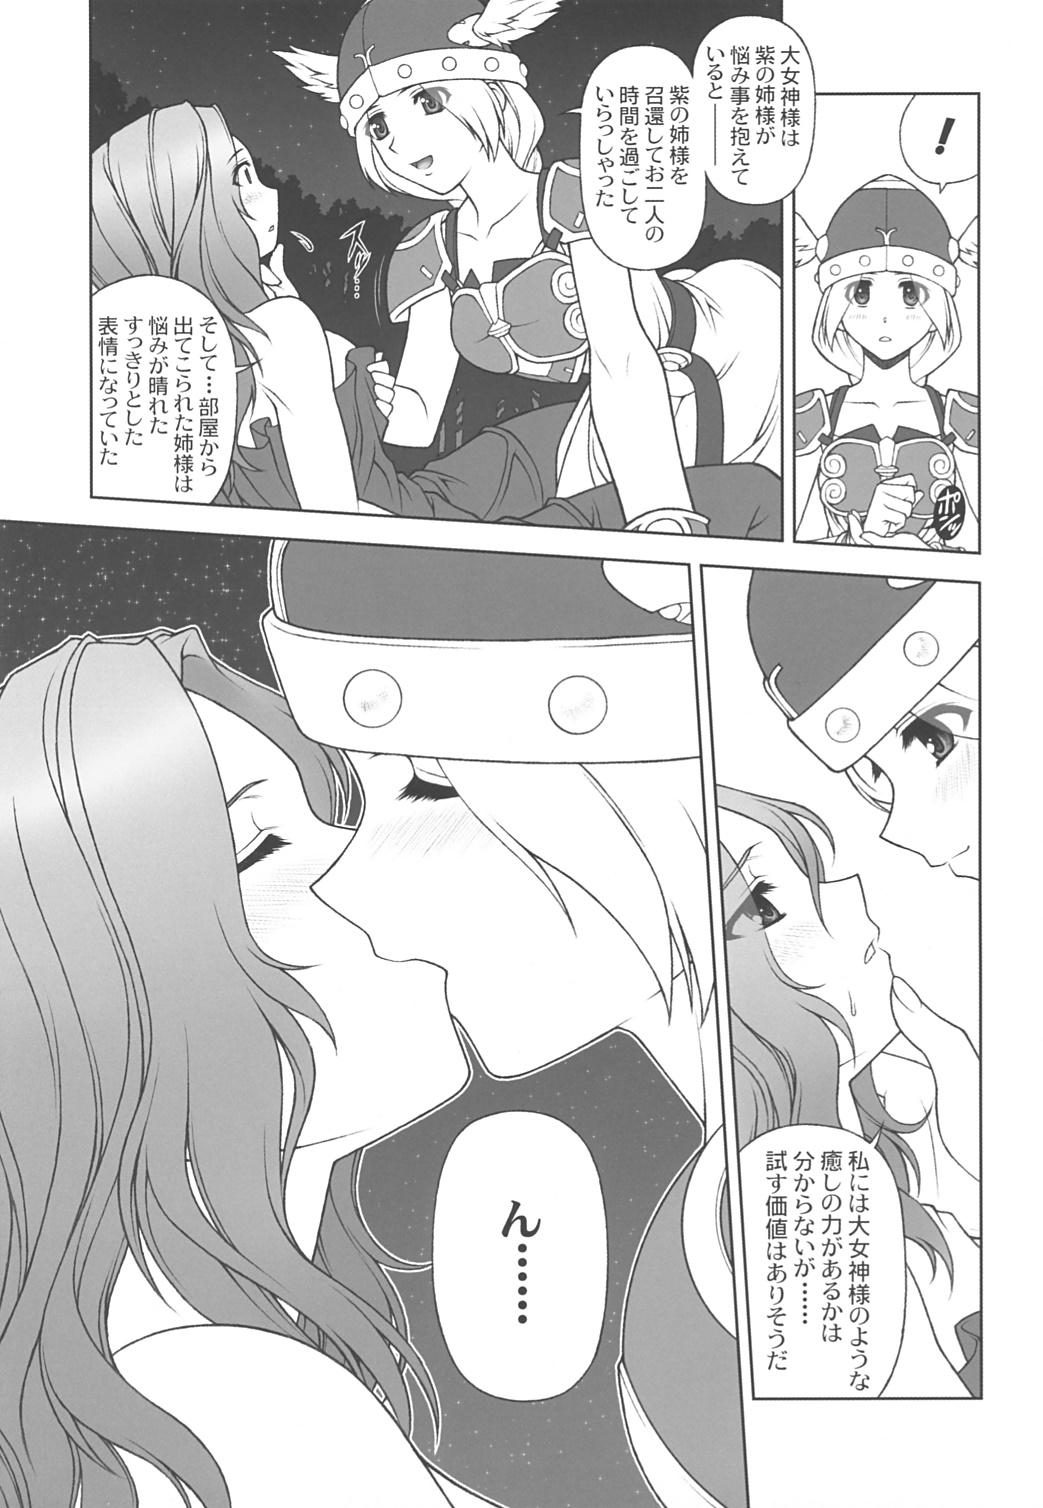 Puto THE EXPERIENCE OF WALKURE - Valkyrie no bouken Brother Sister - Page 6